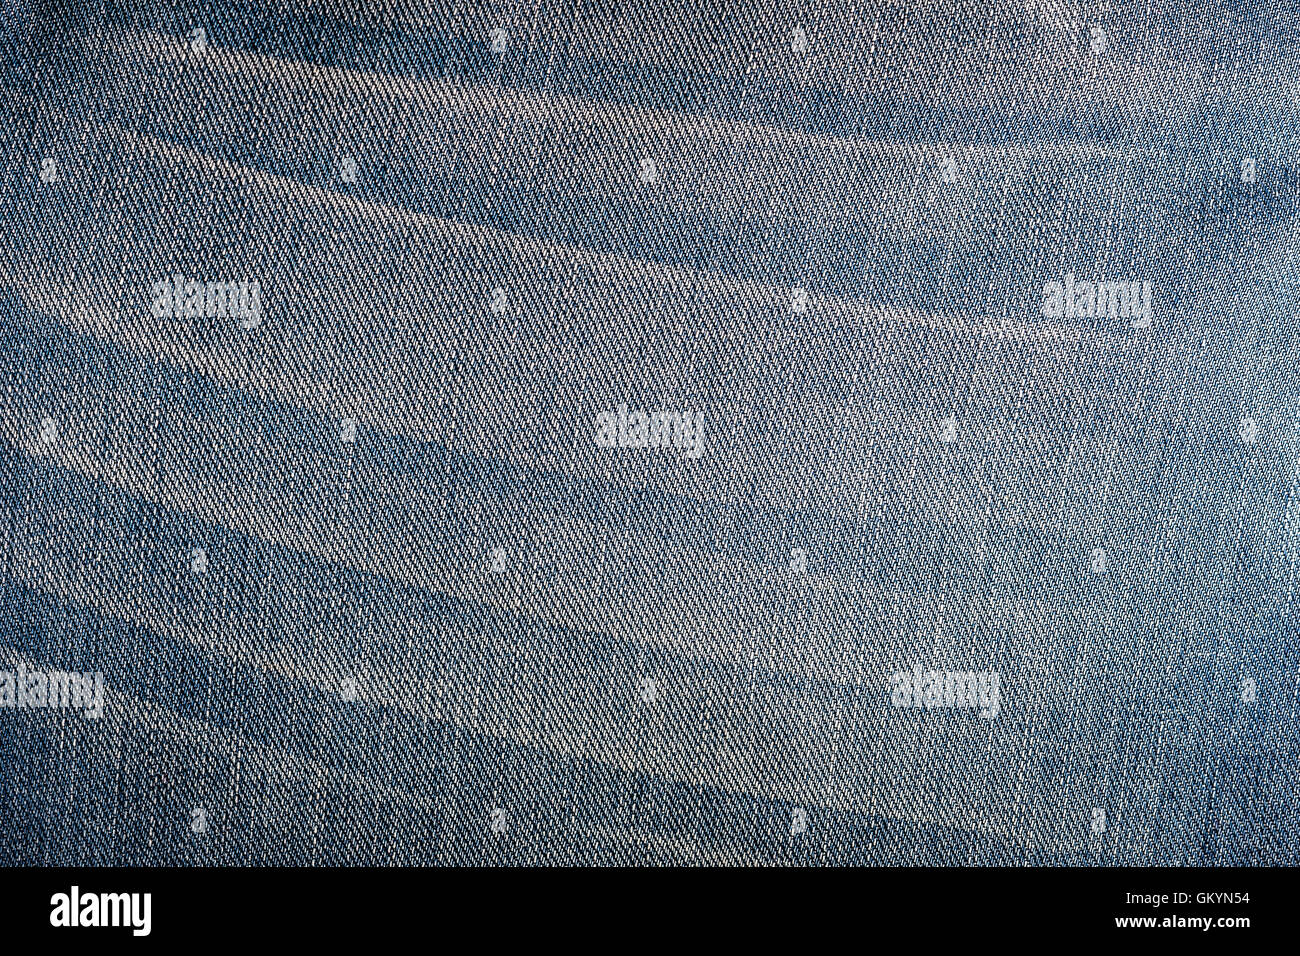 detail and texture of blue jeans background or backdrop Stock Photo